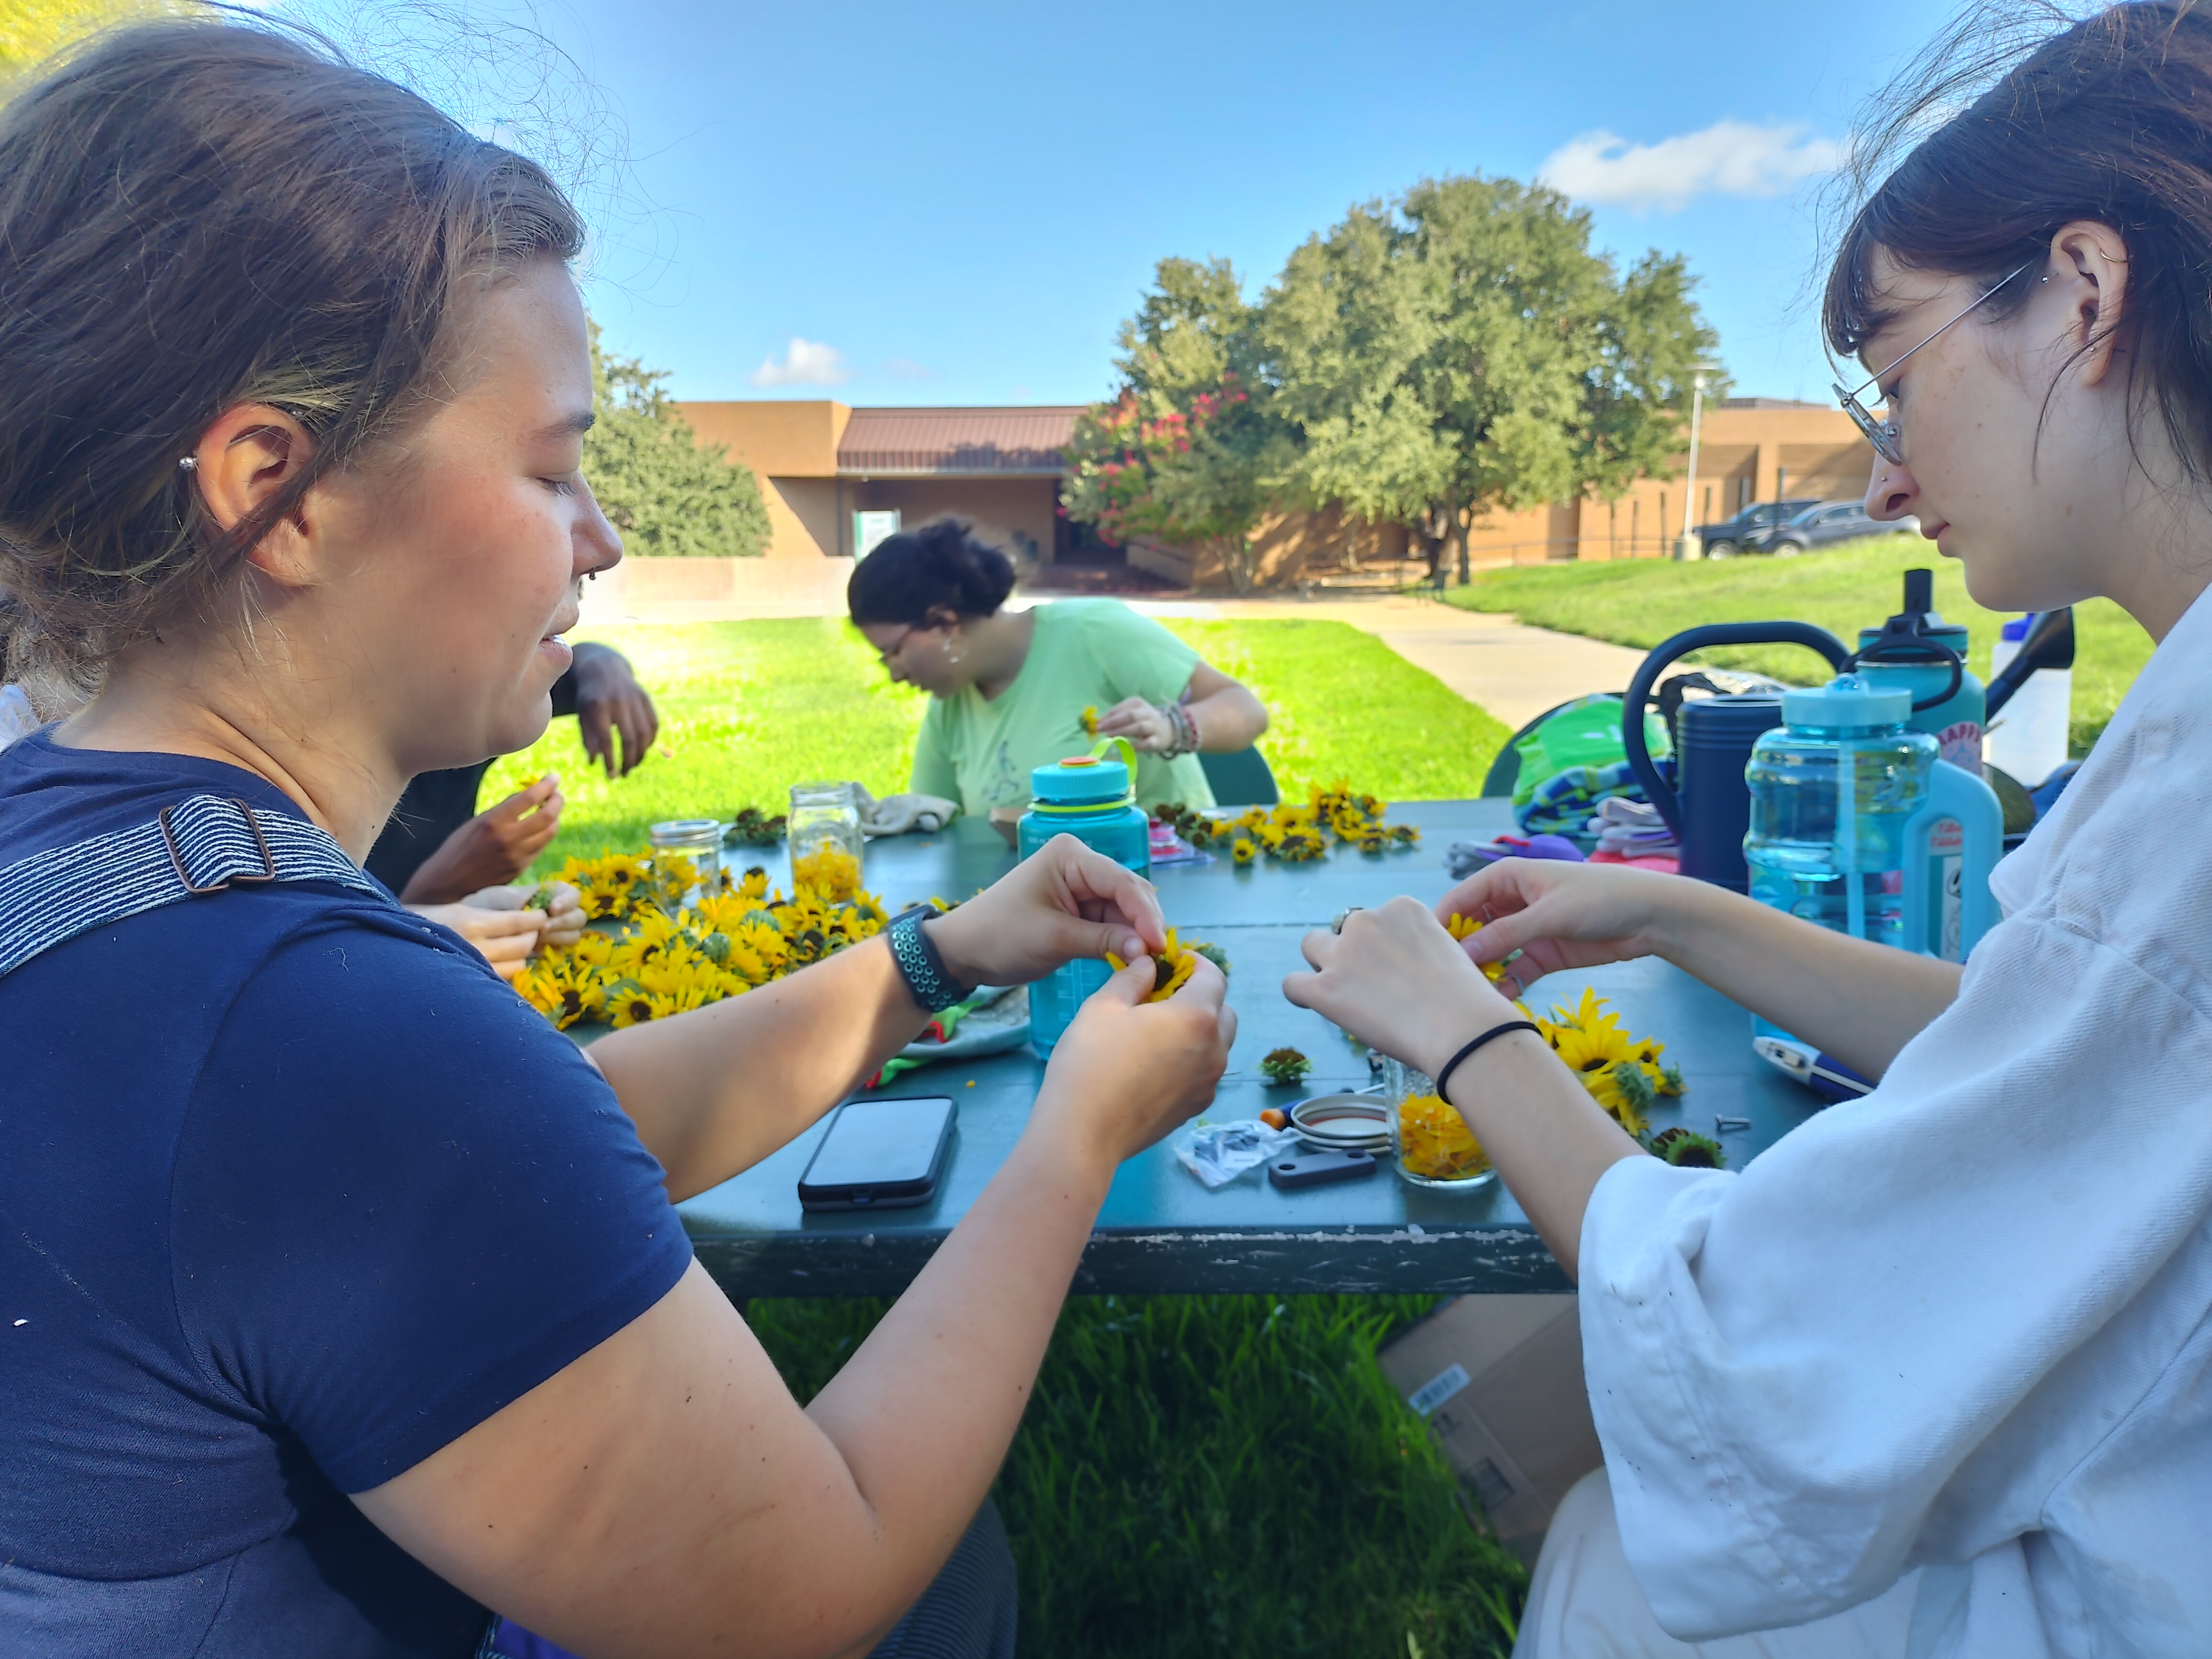 Students sorting flowers for natural dyes